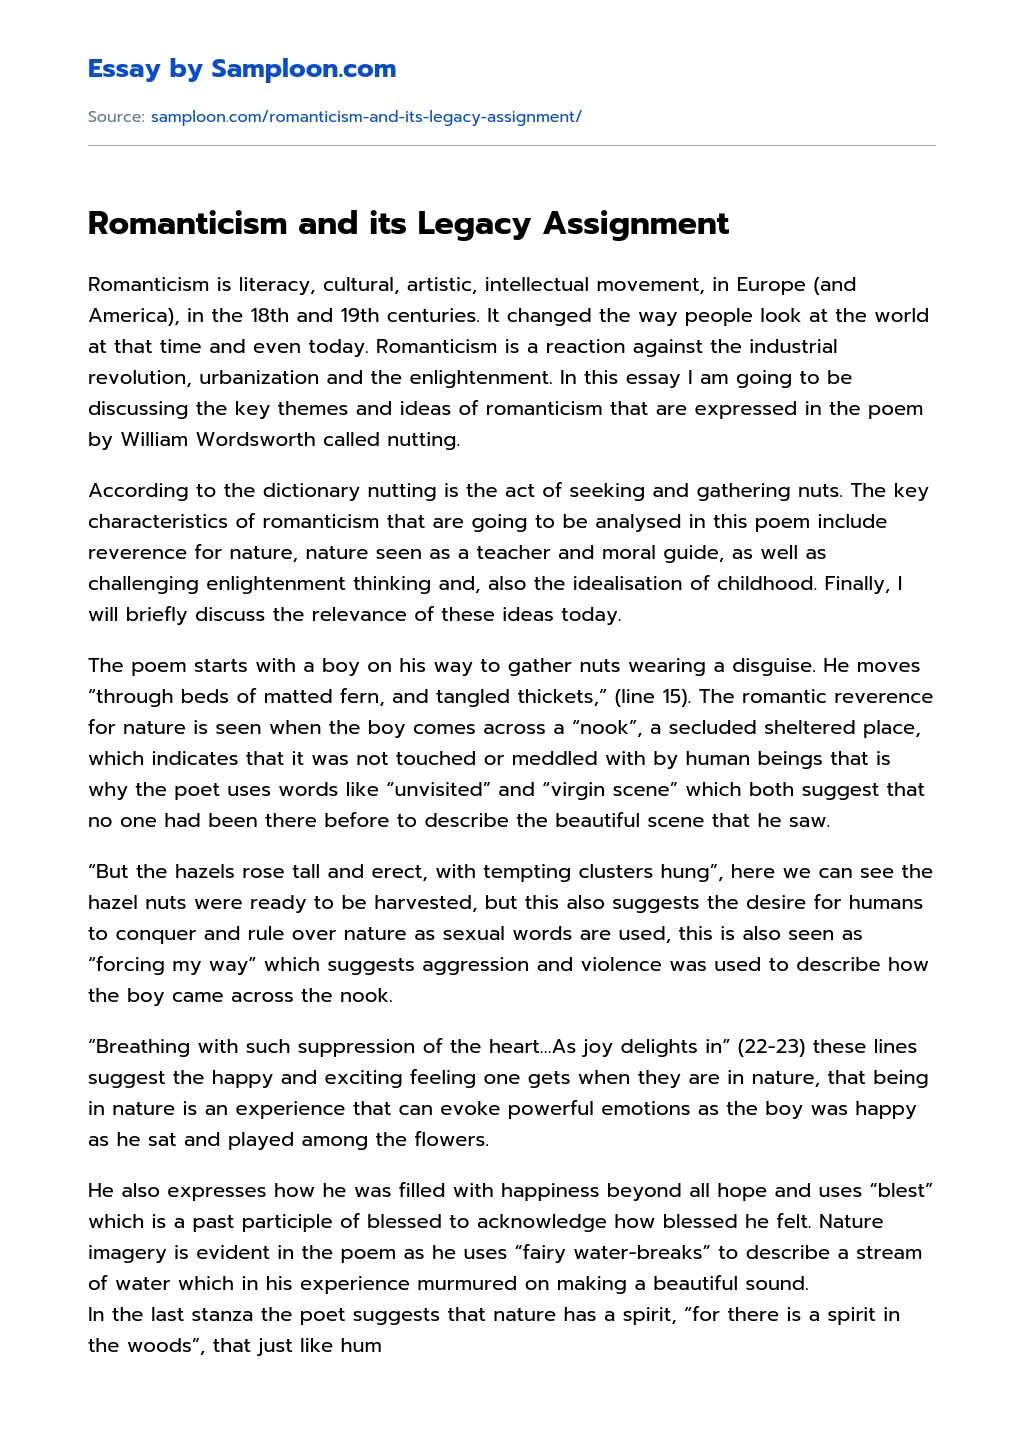 Romanticism and its Legacy Assignment essay